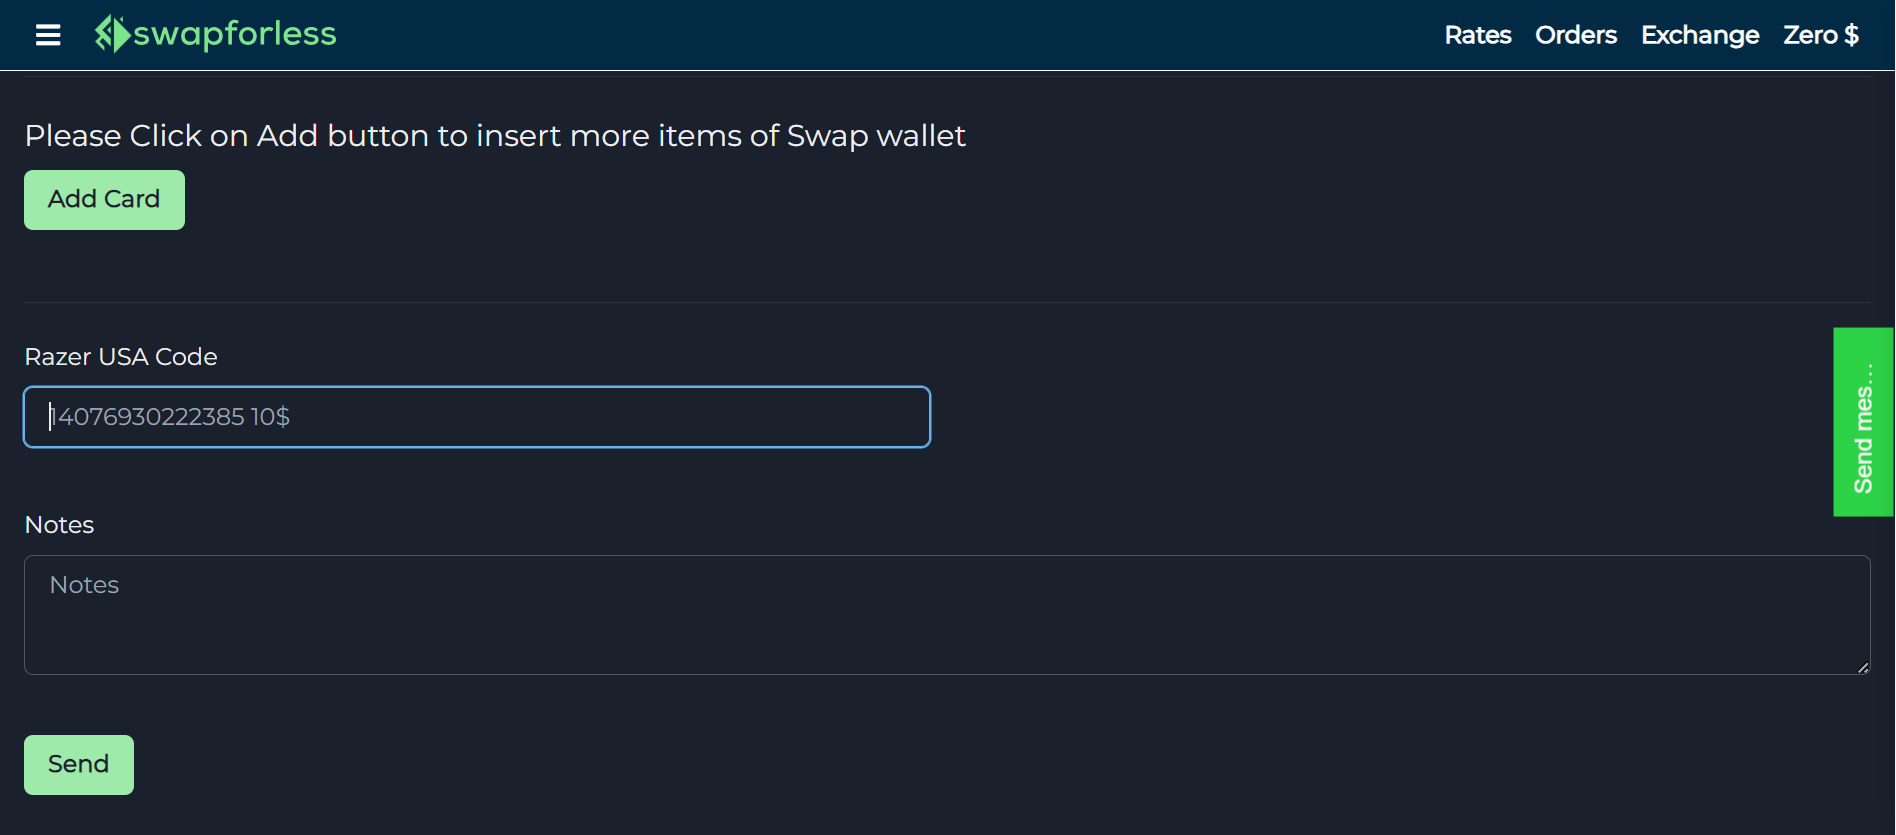 Explanation of How to Convert from Razer to Swap Wallet: